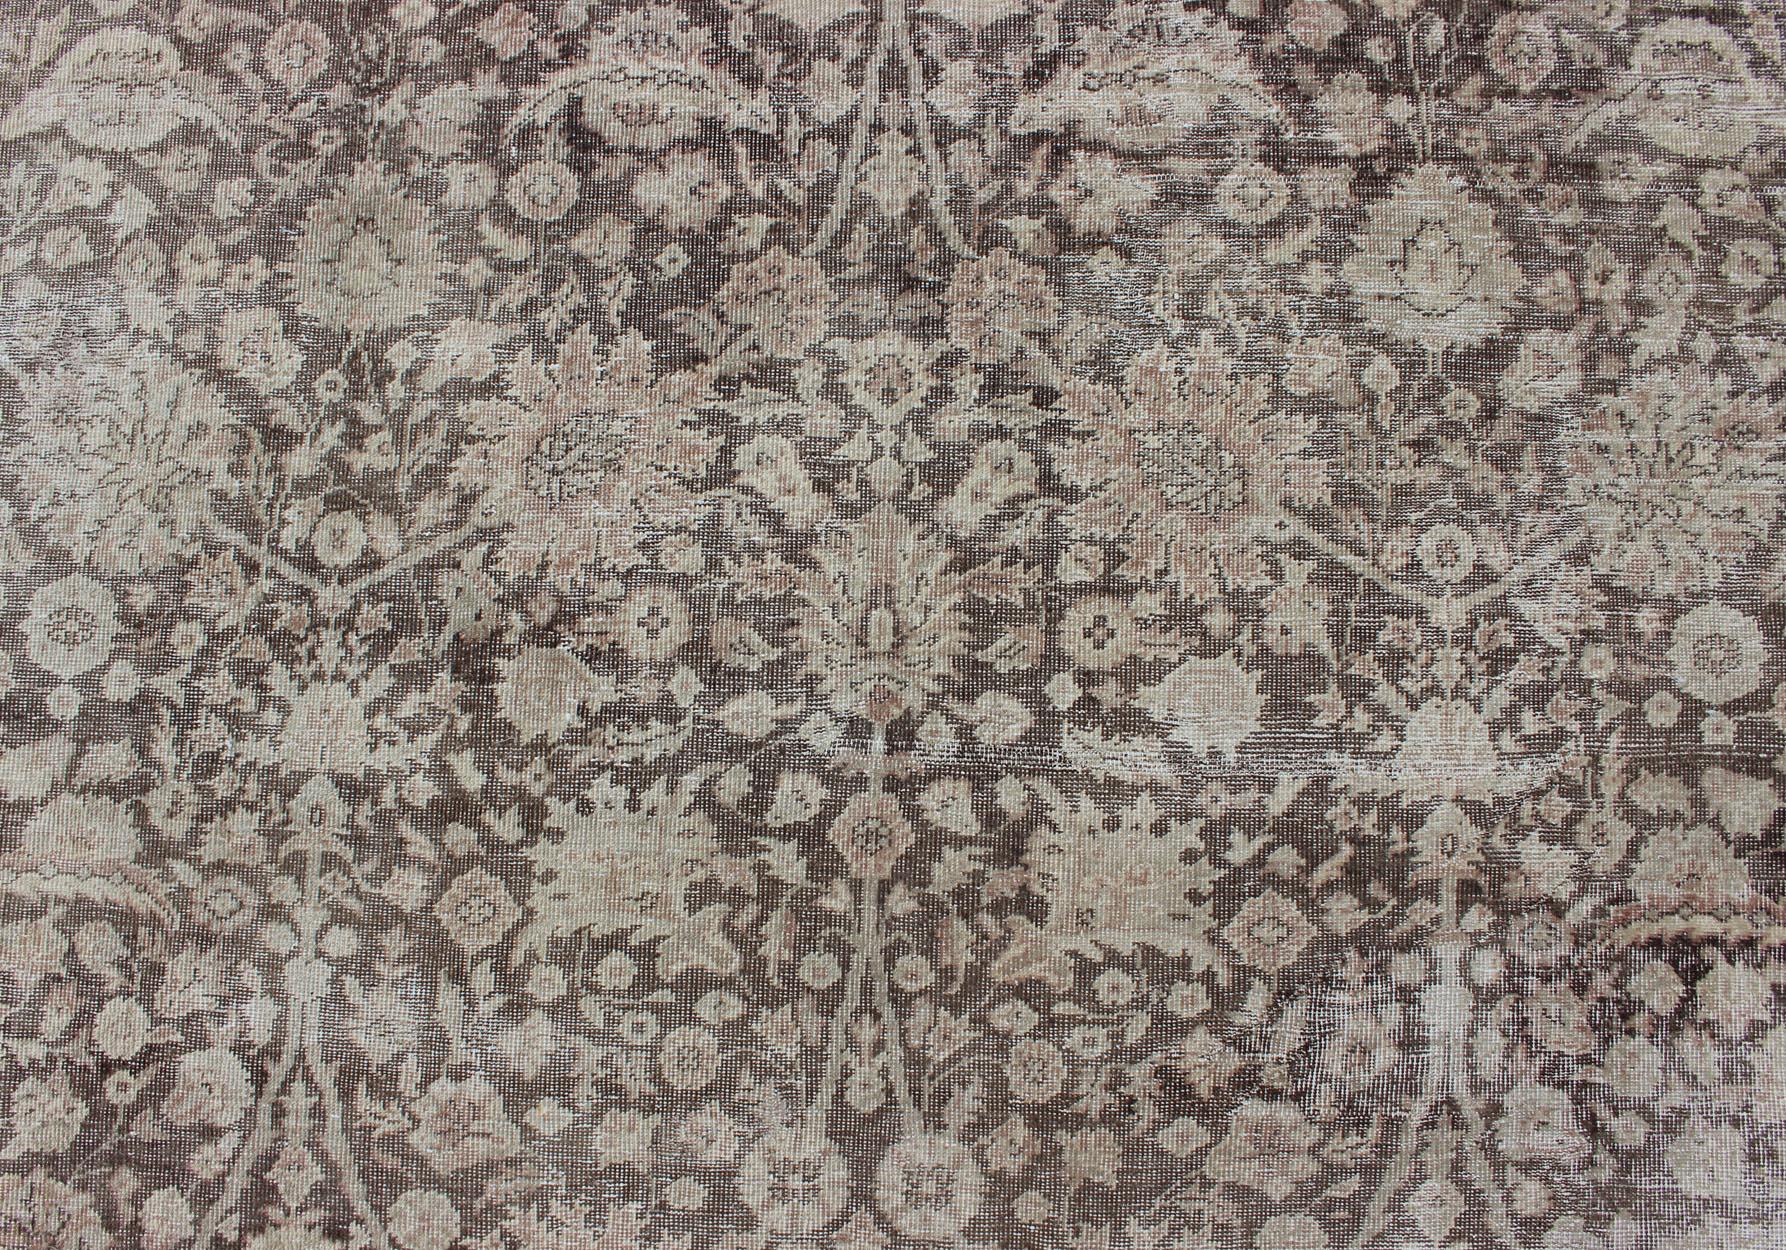 Antique Turkish Oushak Rug with All-Over Floral Design in Earth Tones For Sale 9